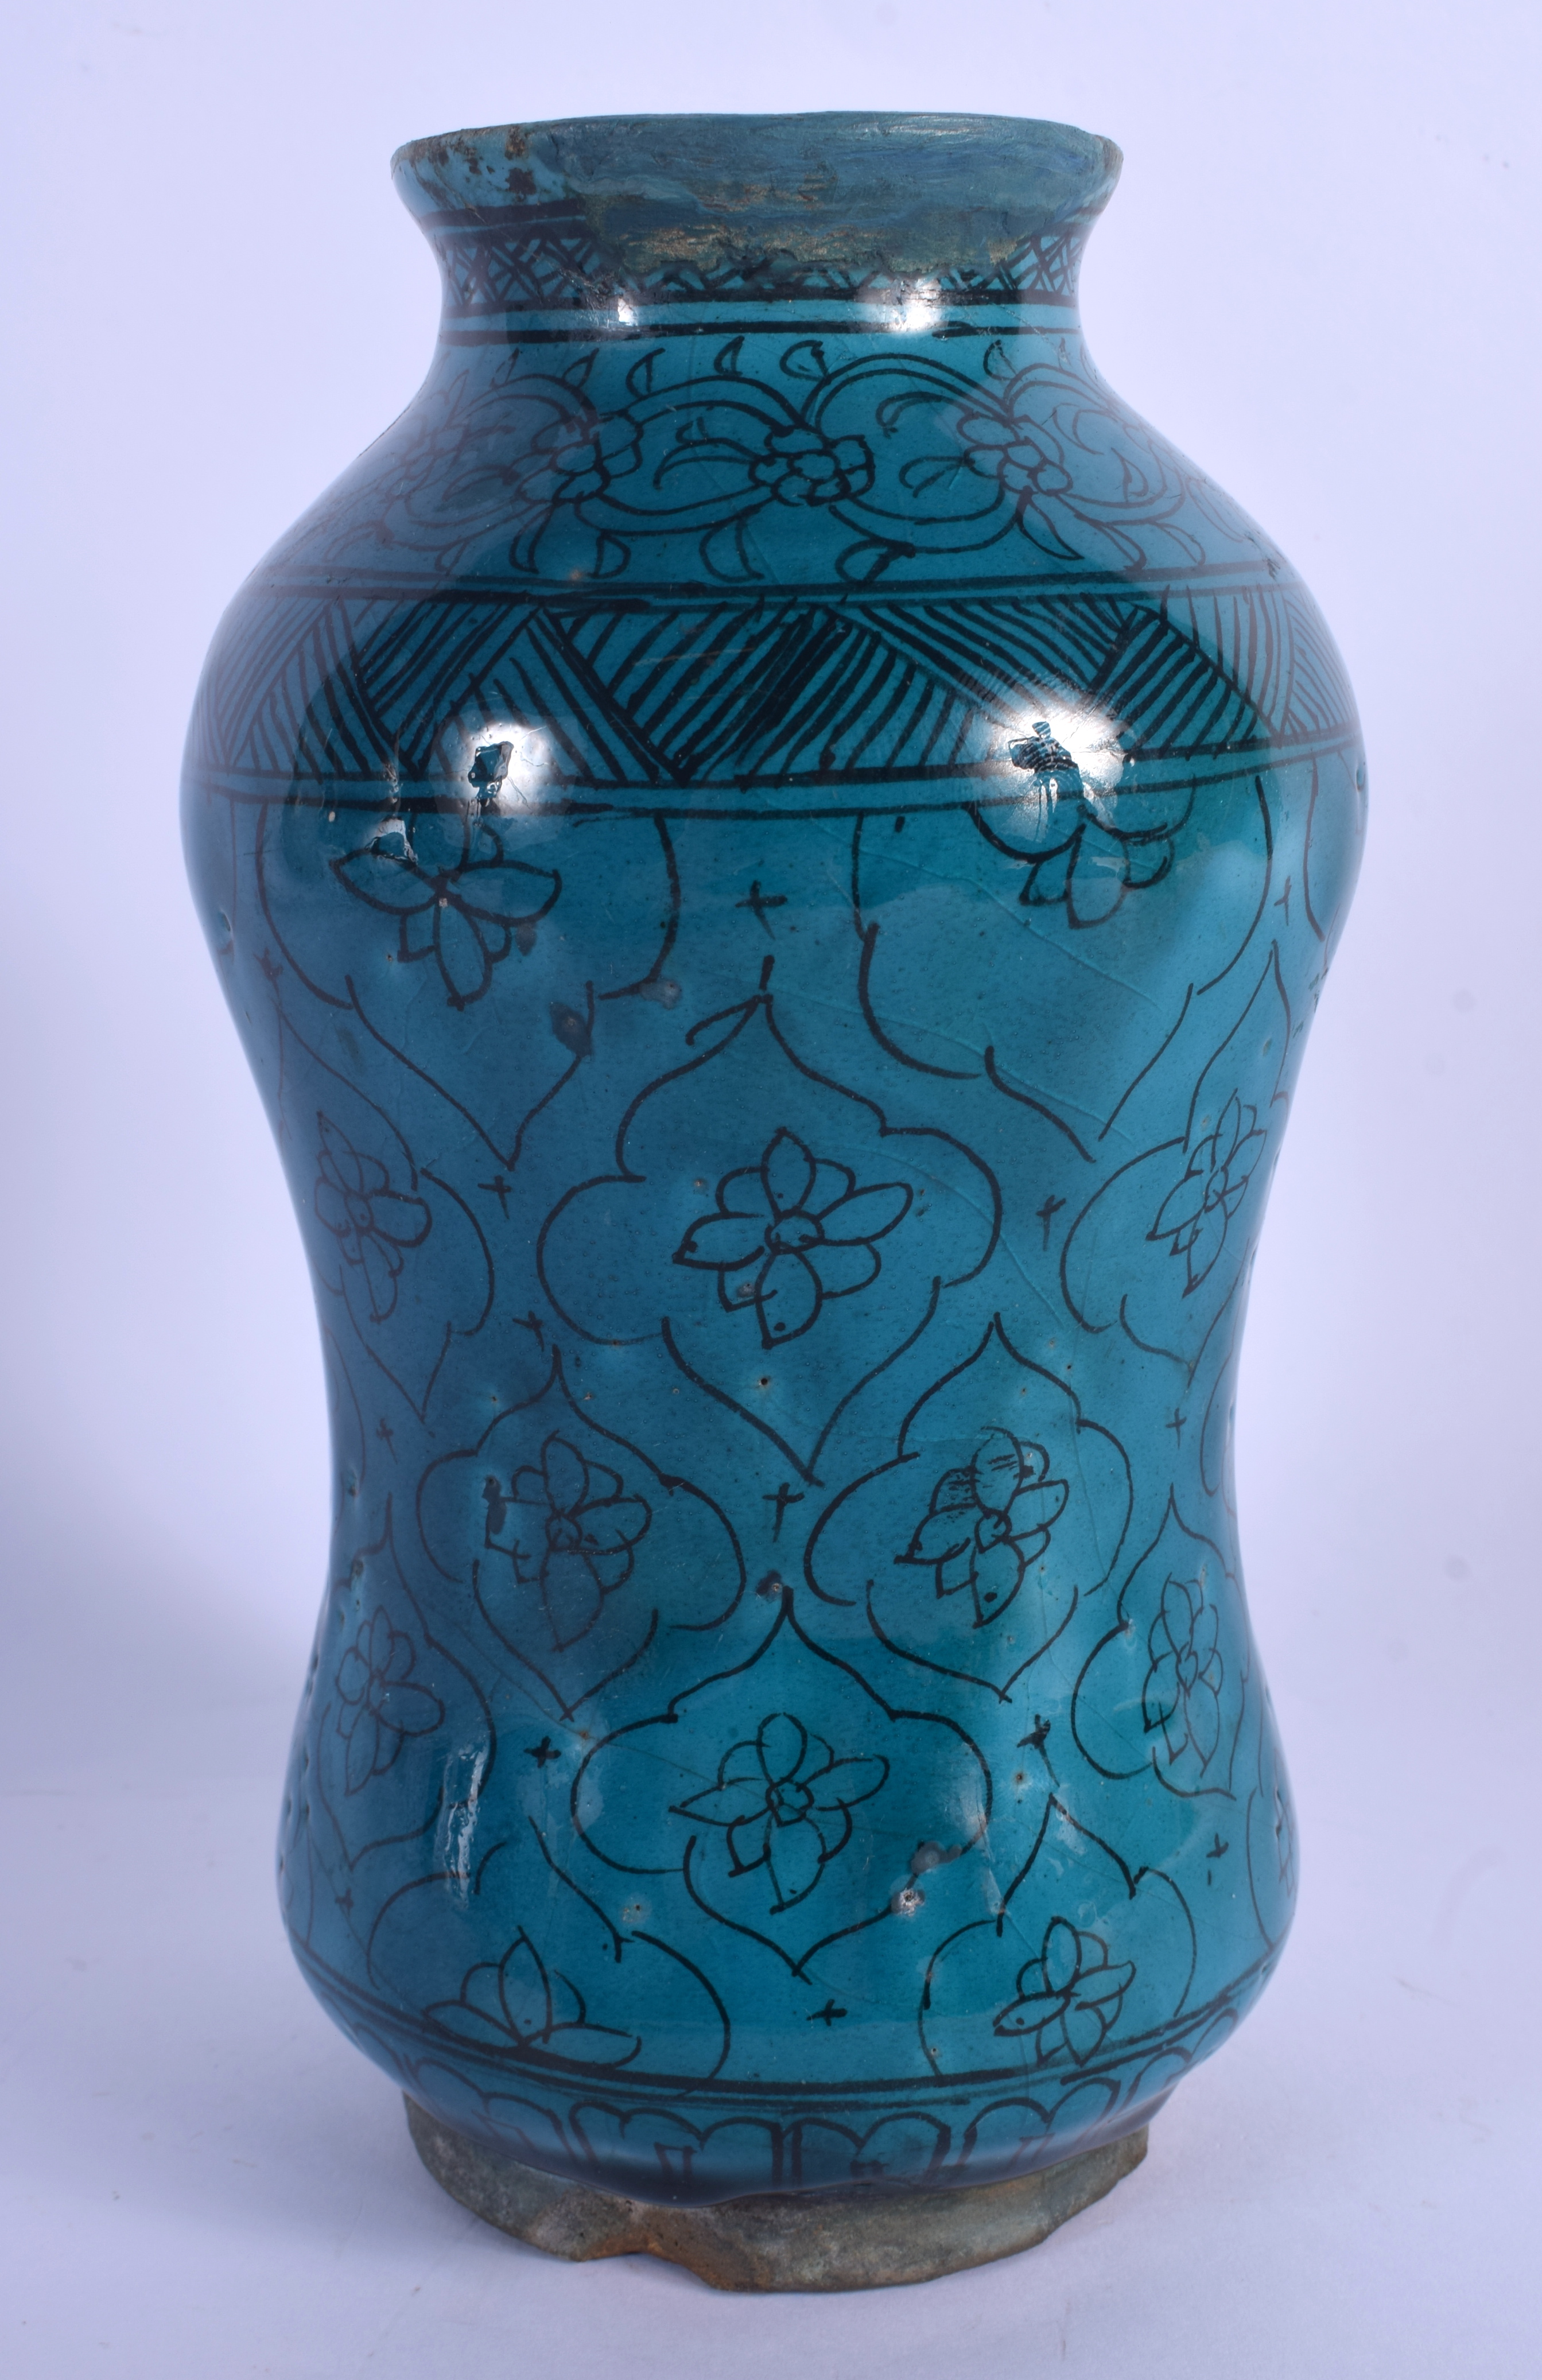 AN EARLY MIDDLE EASTERN KASHAN ISLAMIC TURQUOISE GLAZED ALBARELLO JAR painted with flowers. 21.5 cm - Image 2 of 3